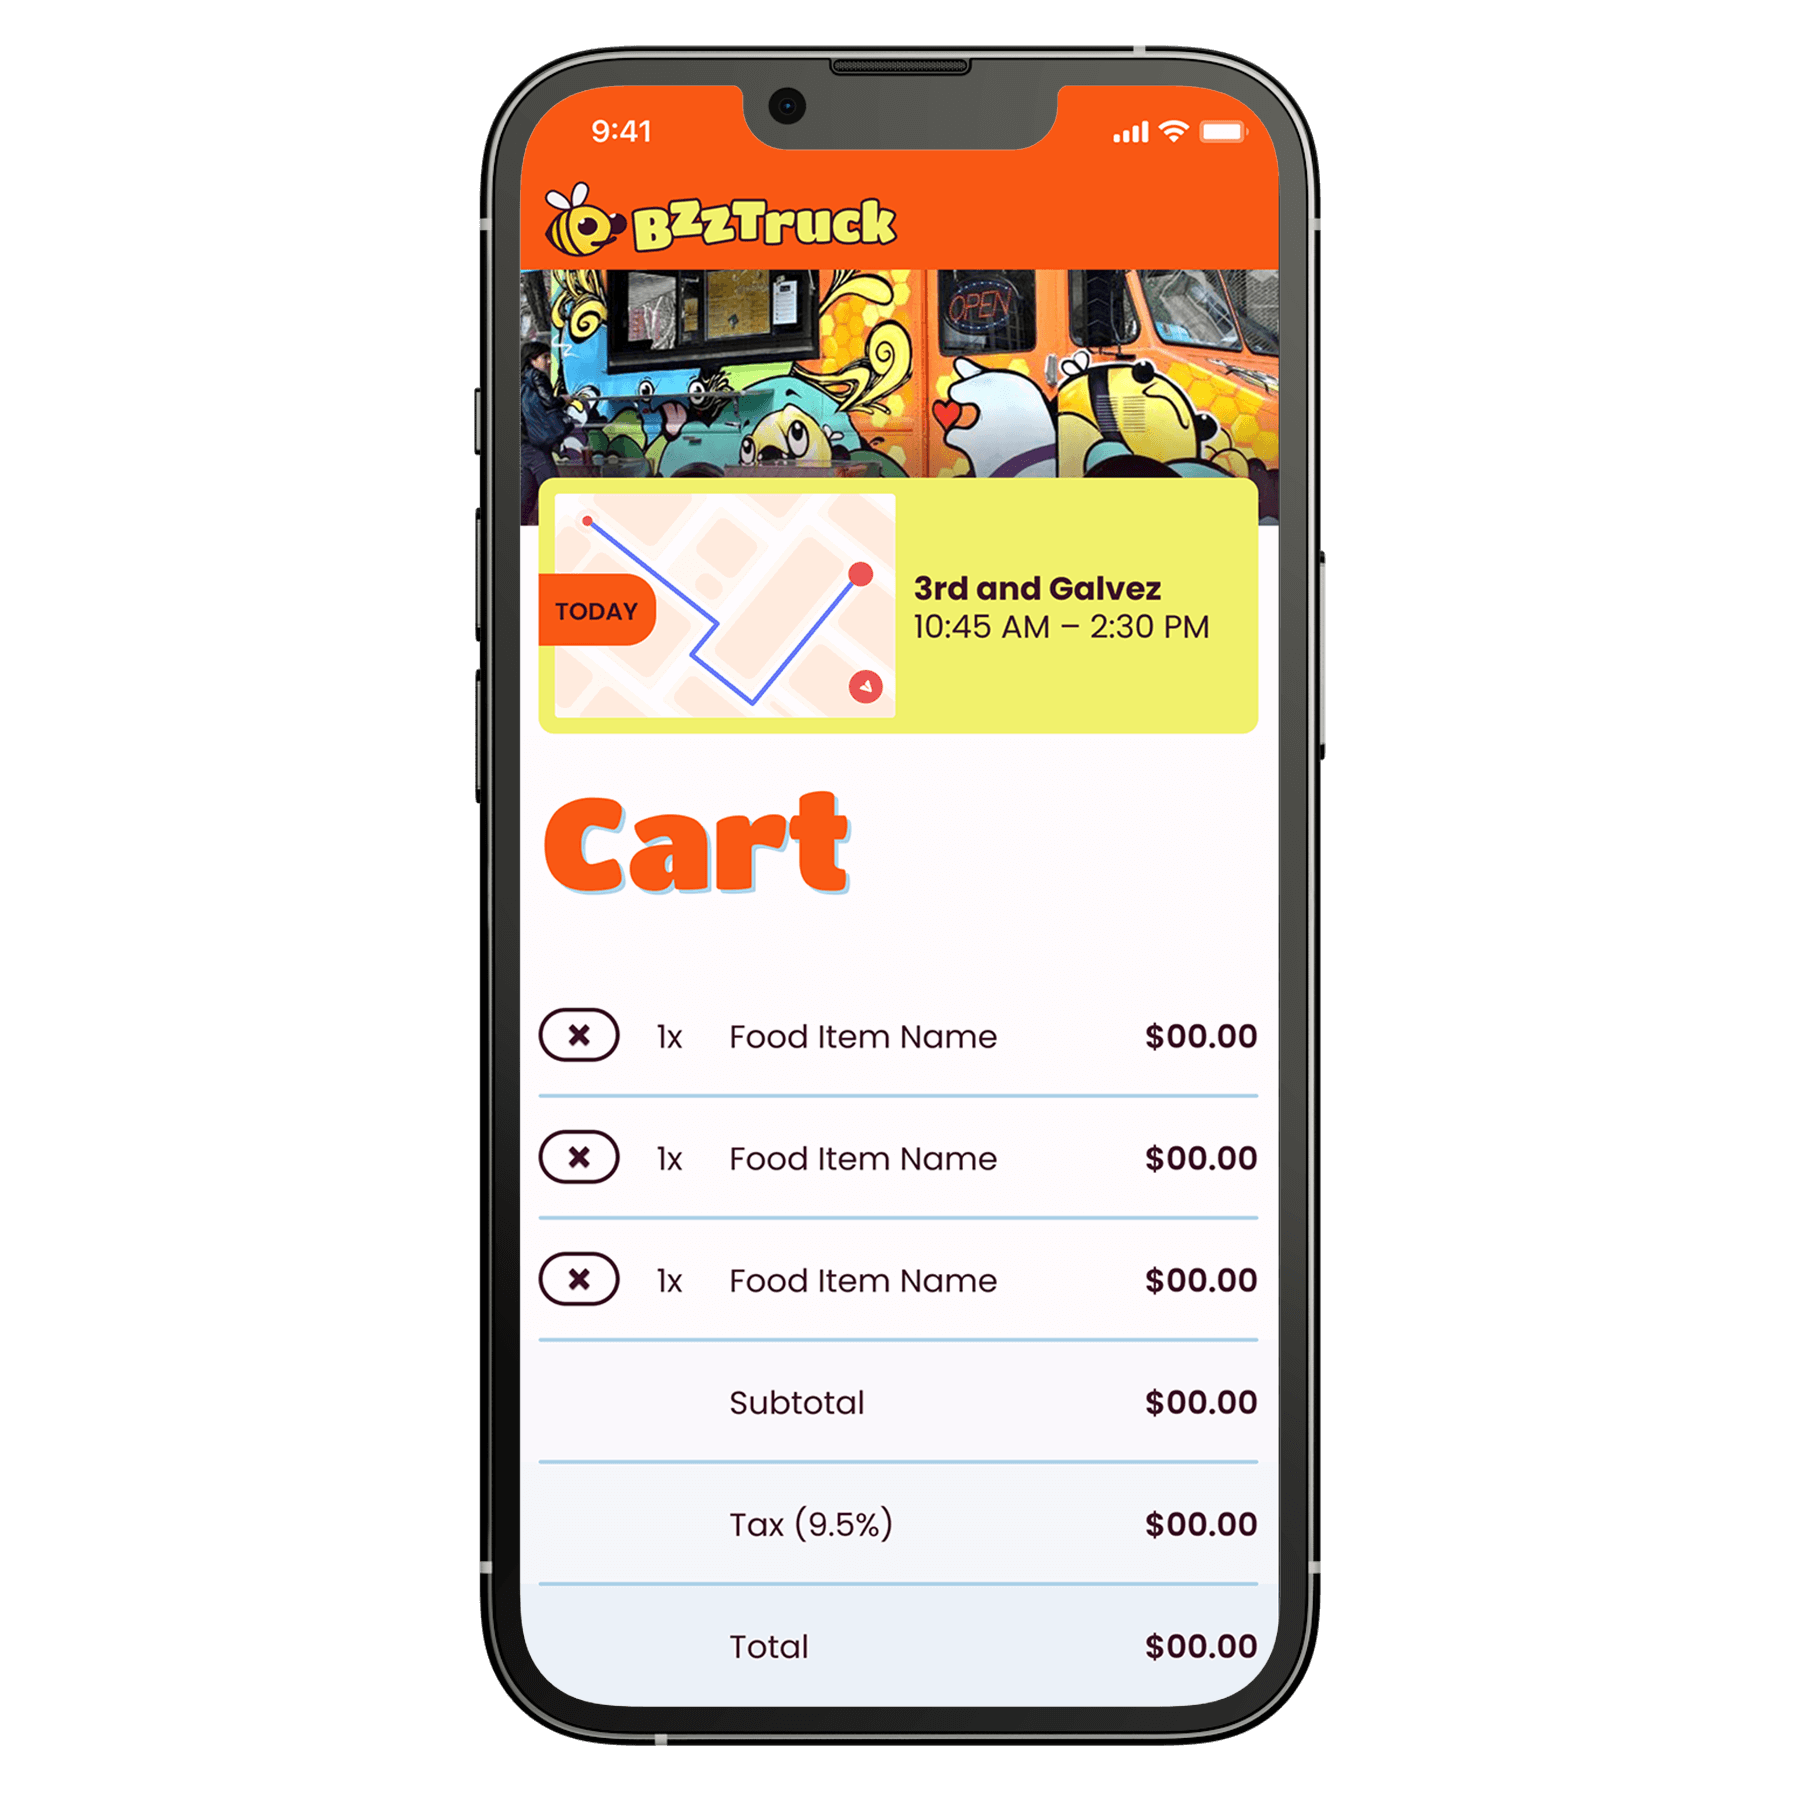 iPhone showing the screen with the shopping cart.